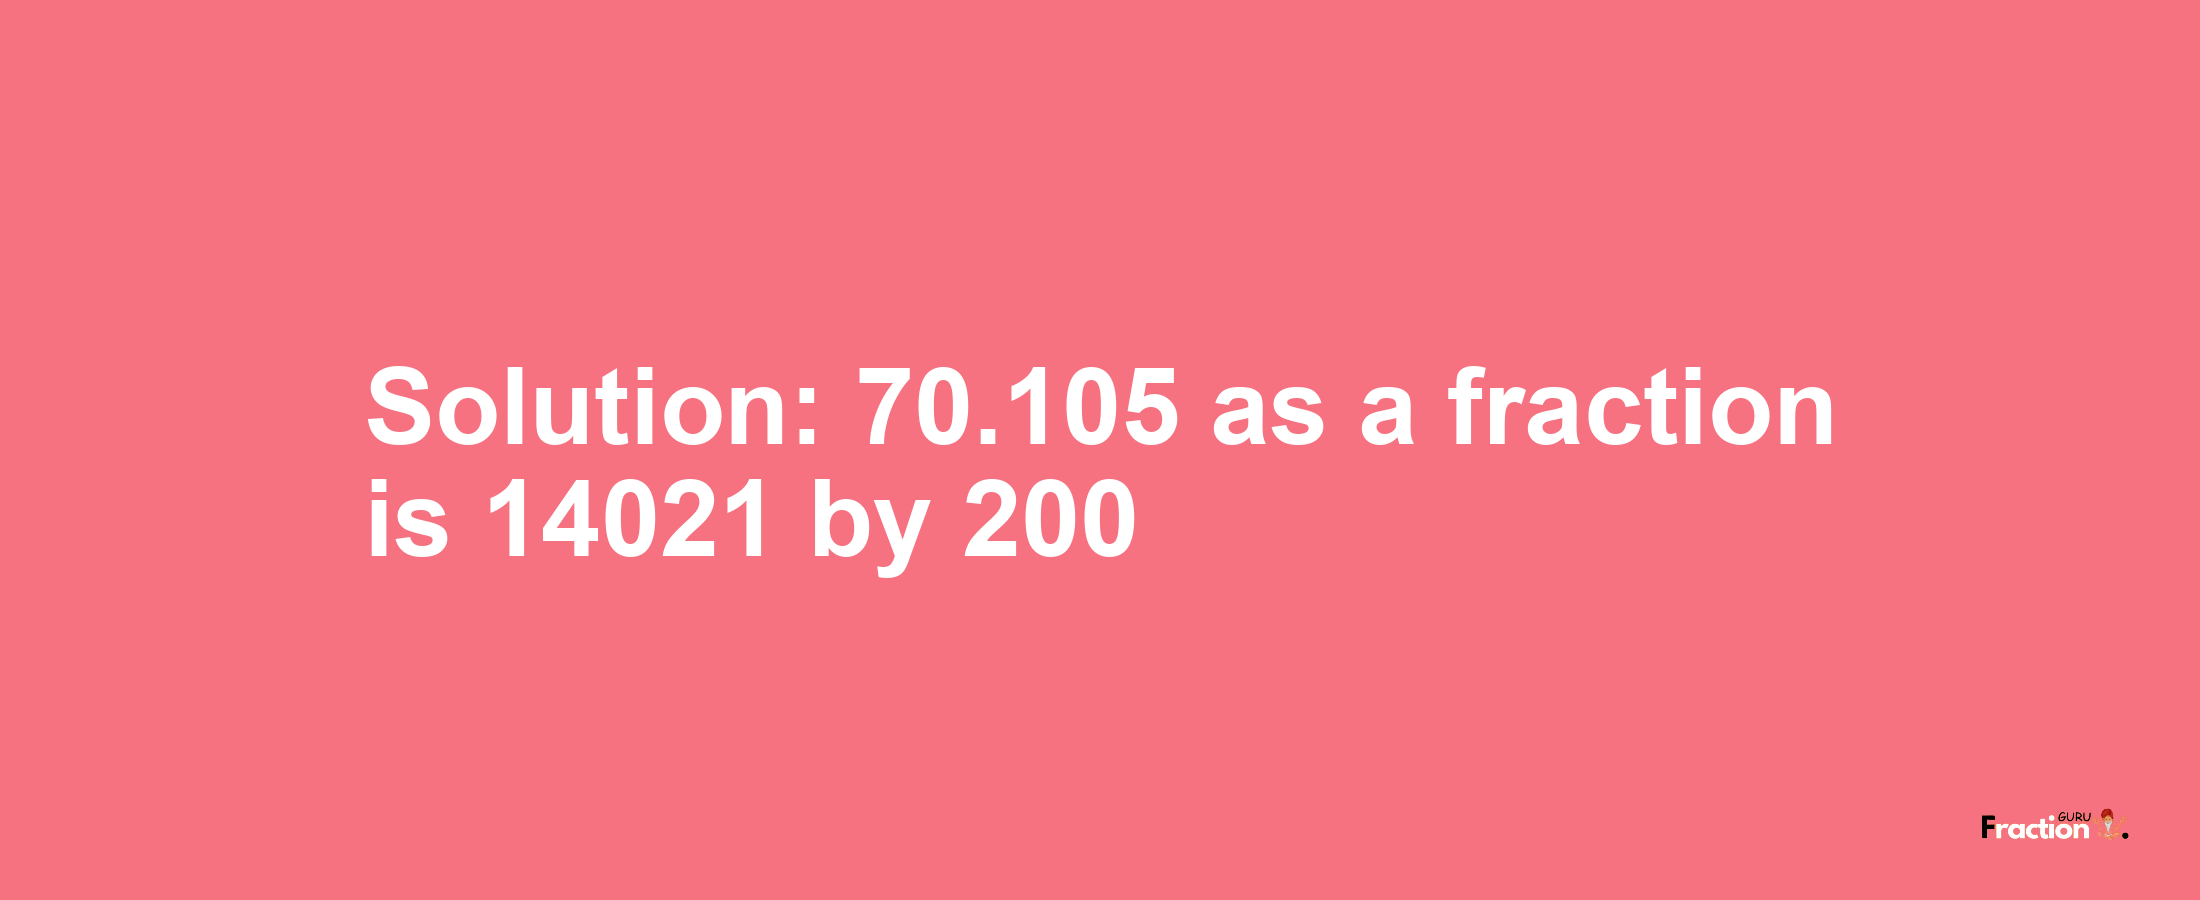 Solution:70.105 as a fraction is 14021/200